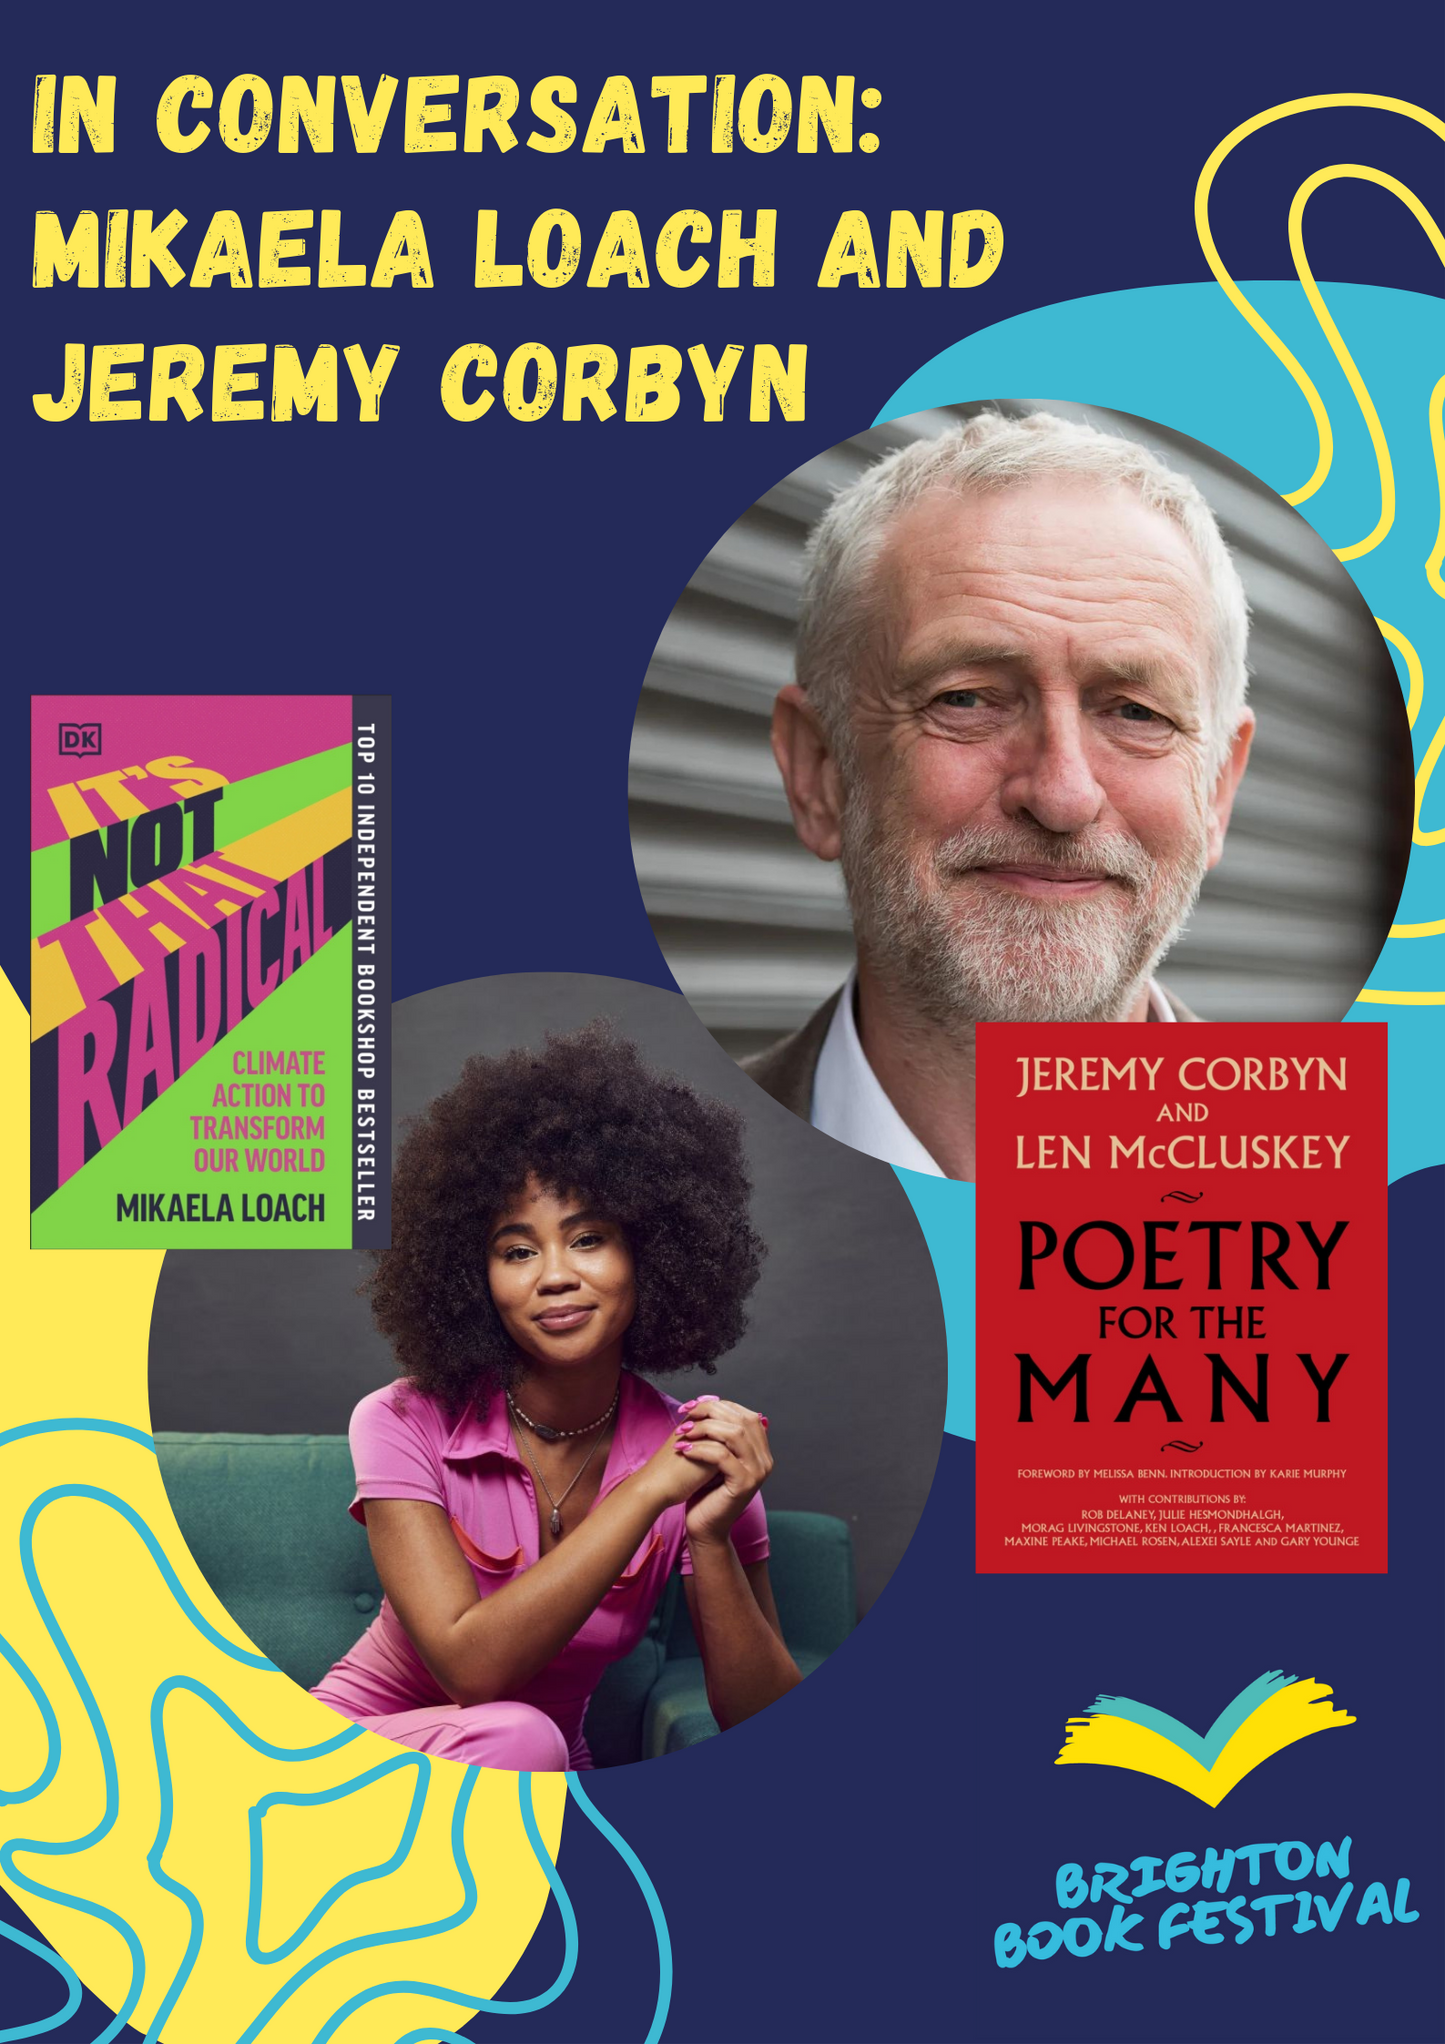 In Conversation: Mikaela Loach and Jeremy Corbyn 28th April